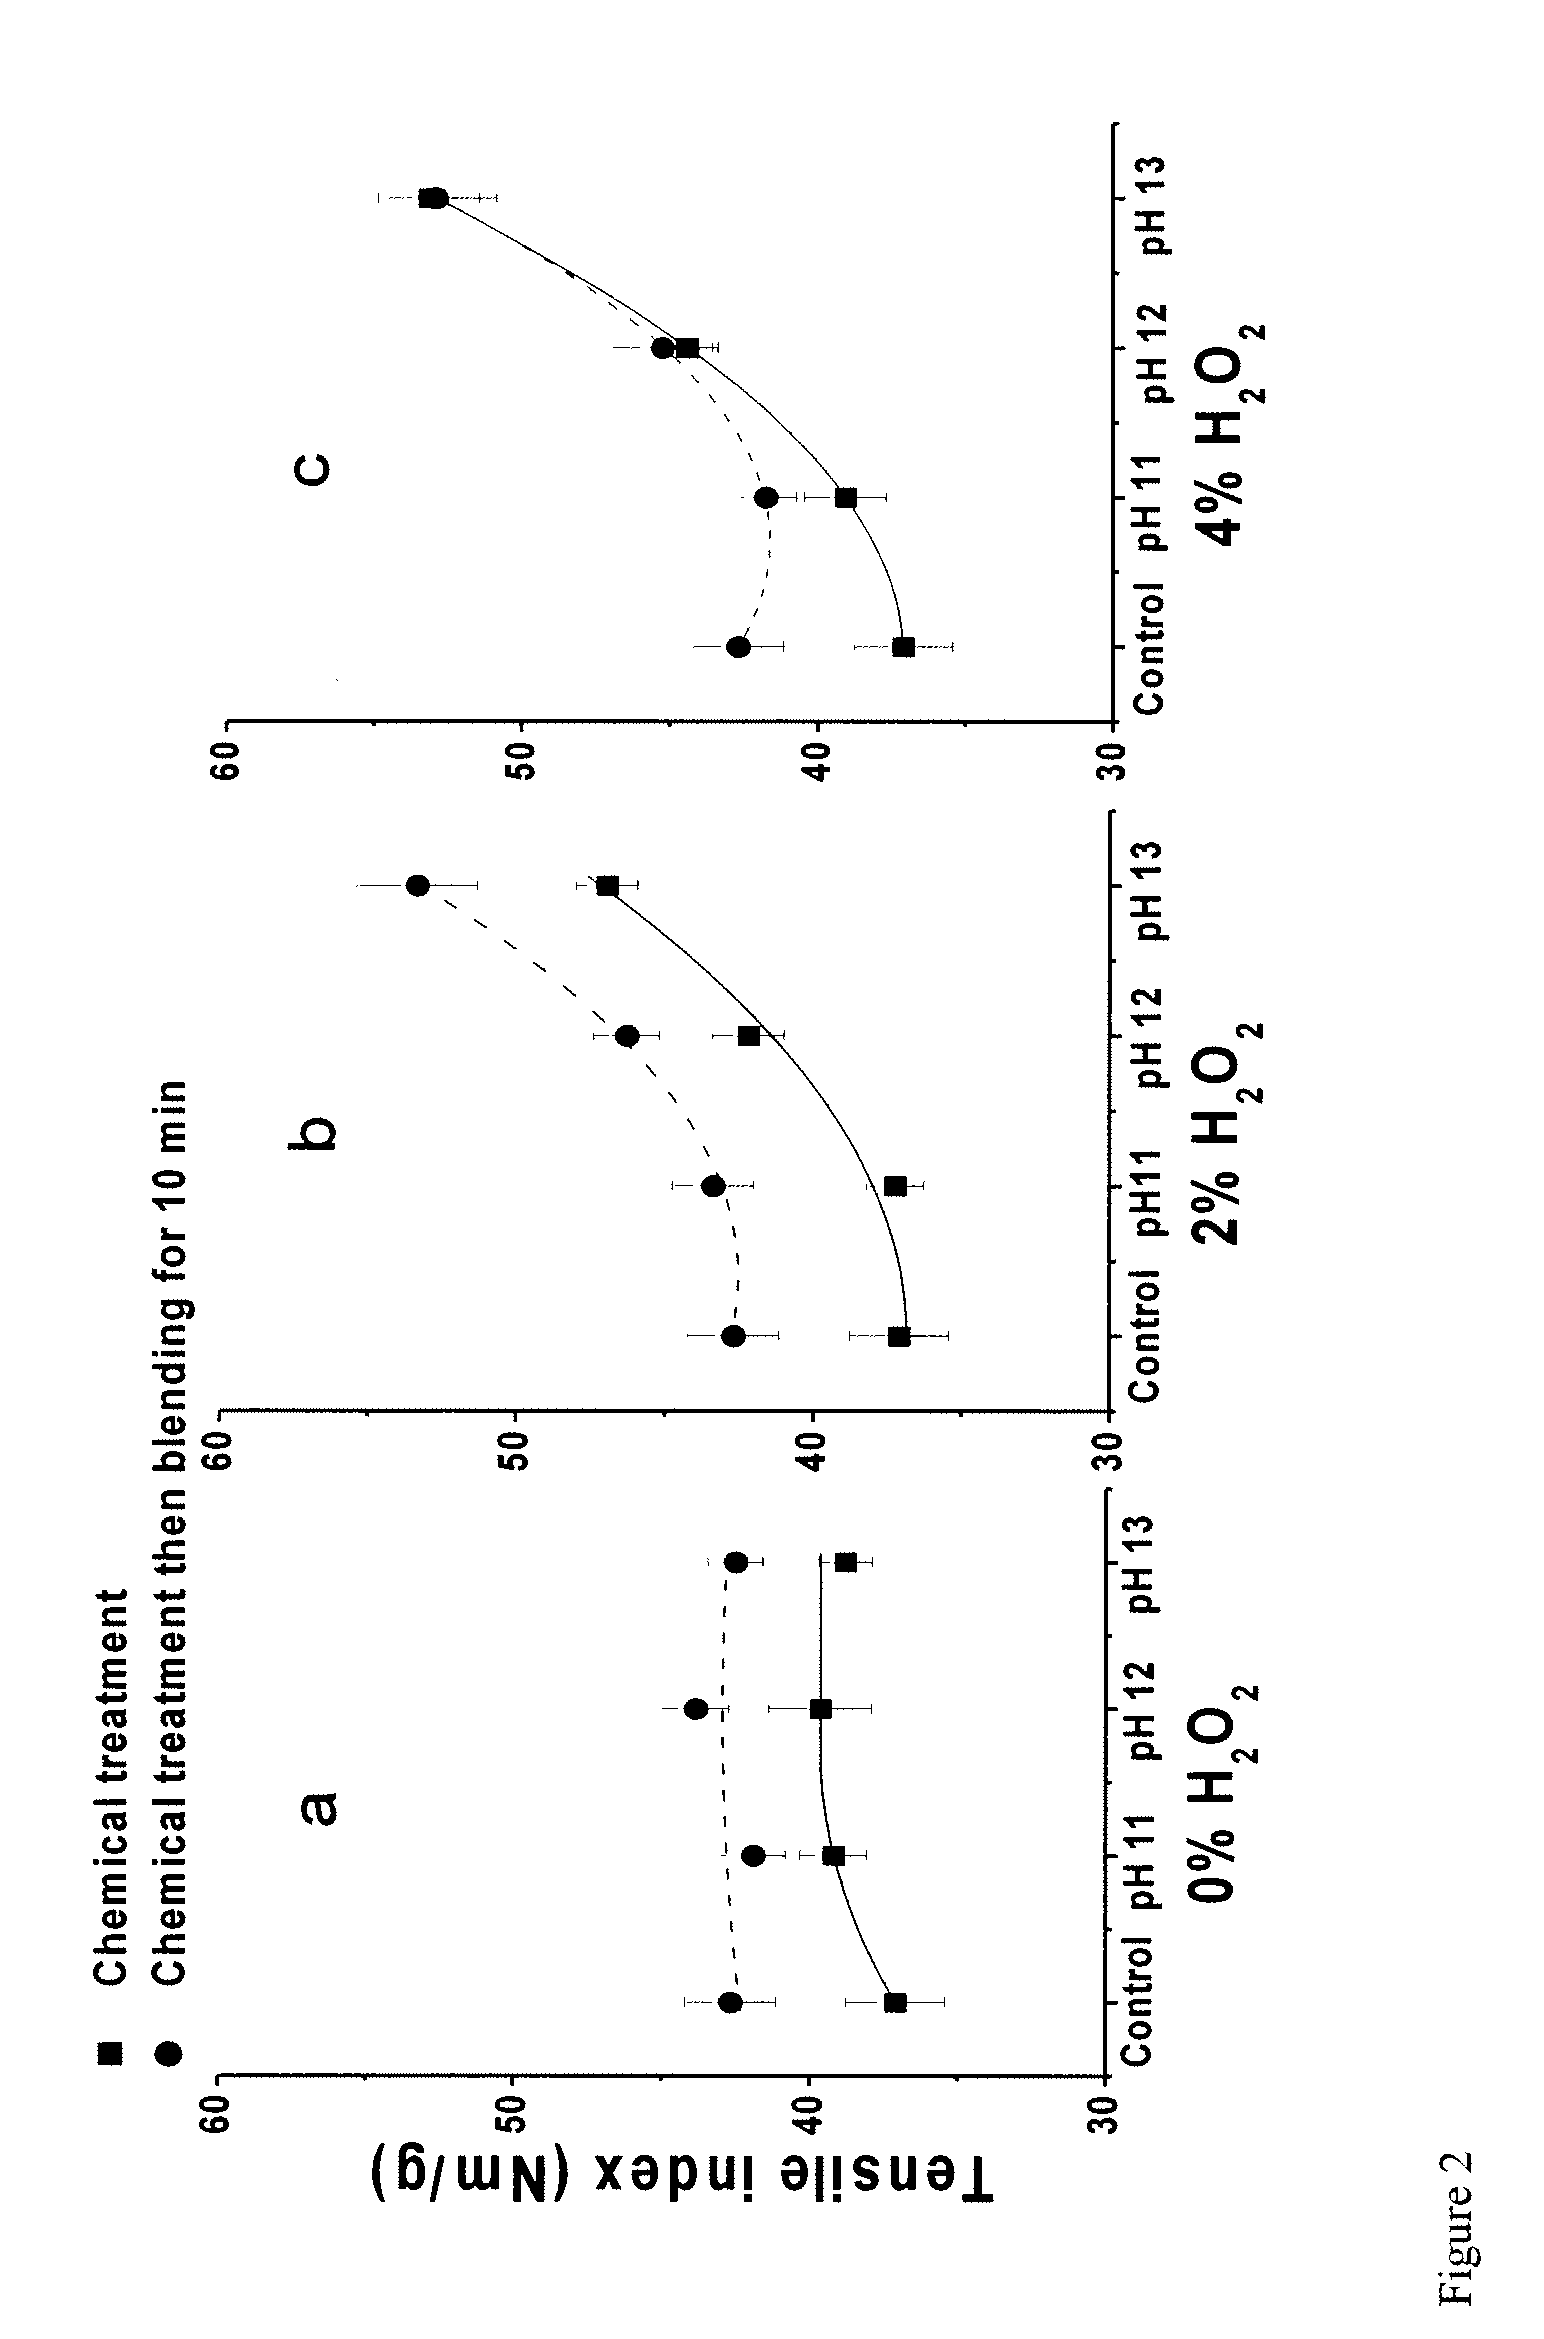 Process for reducing specific energy demand during refining of thermomechanical and chemi-thermomechanical pulp